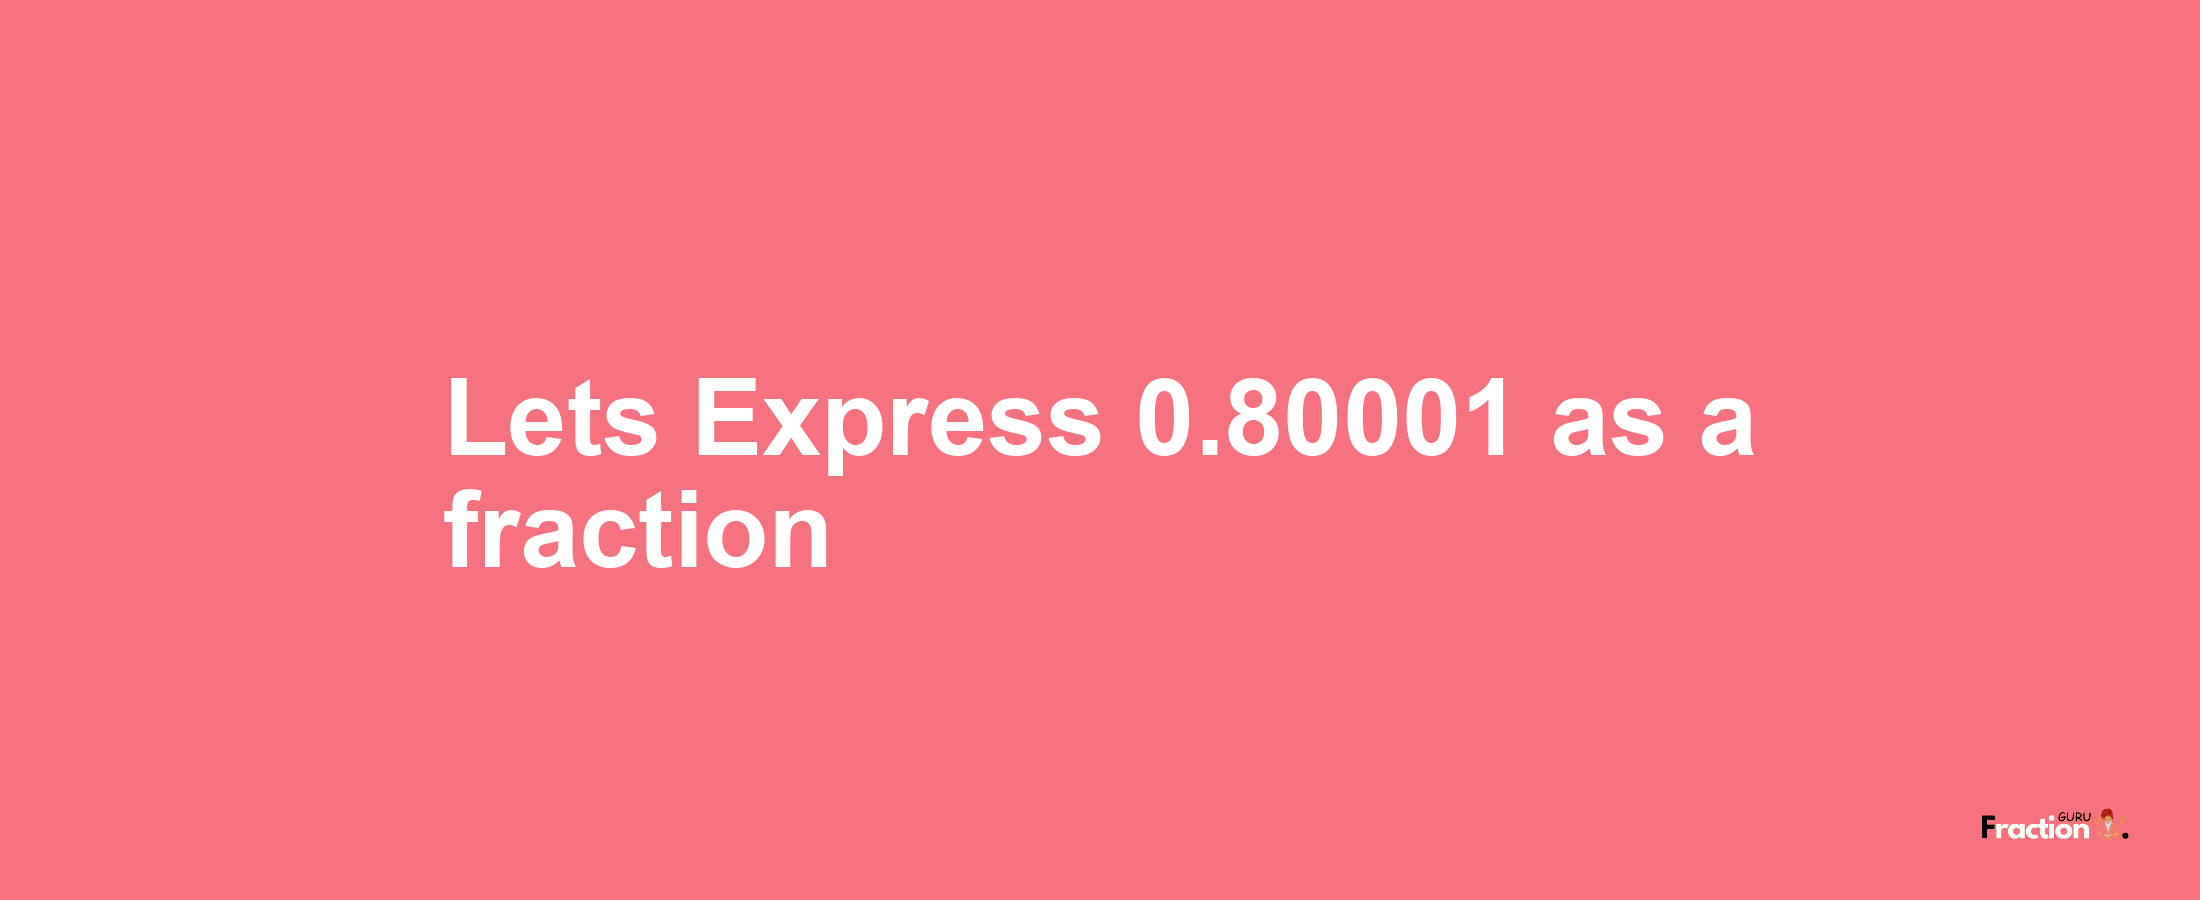 Lets Express 0.80001 as afraction